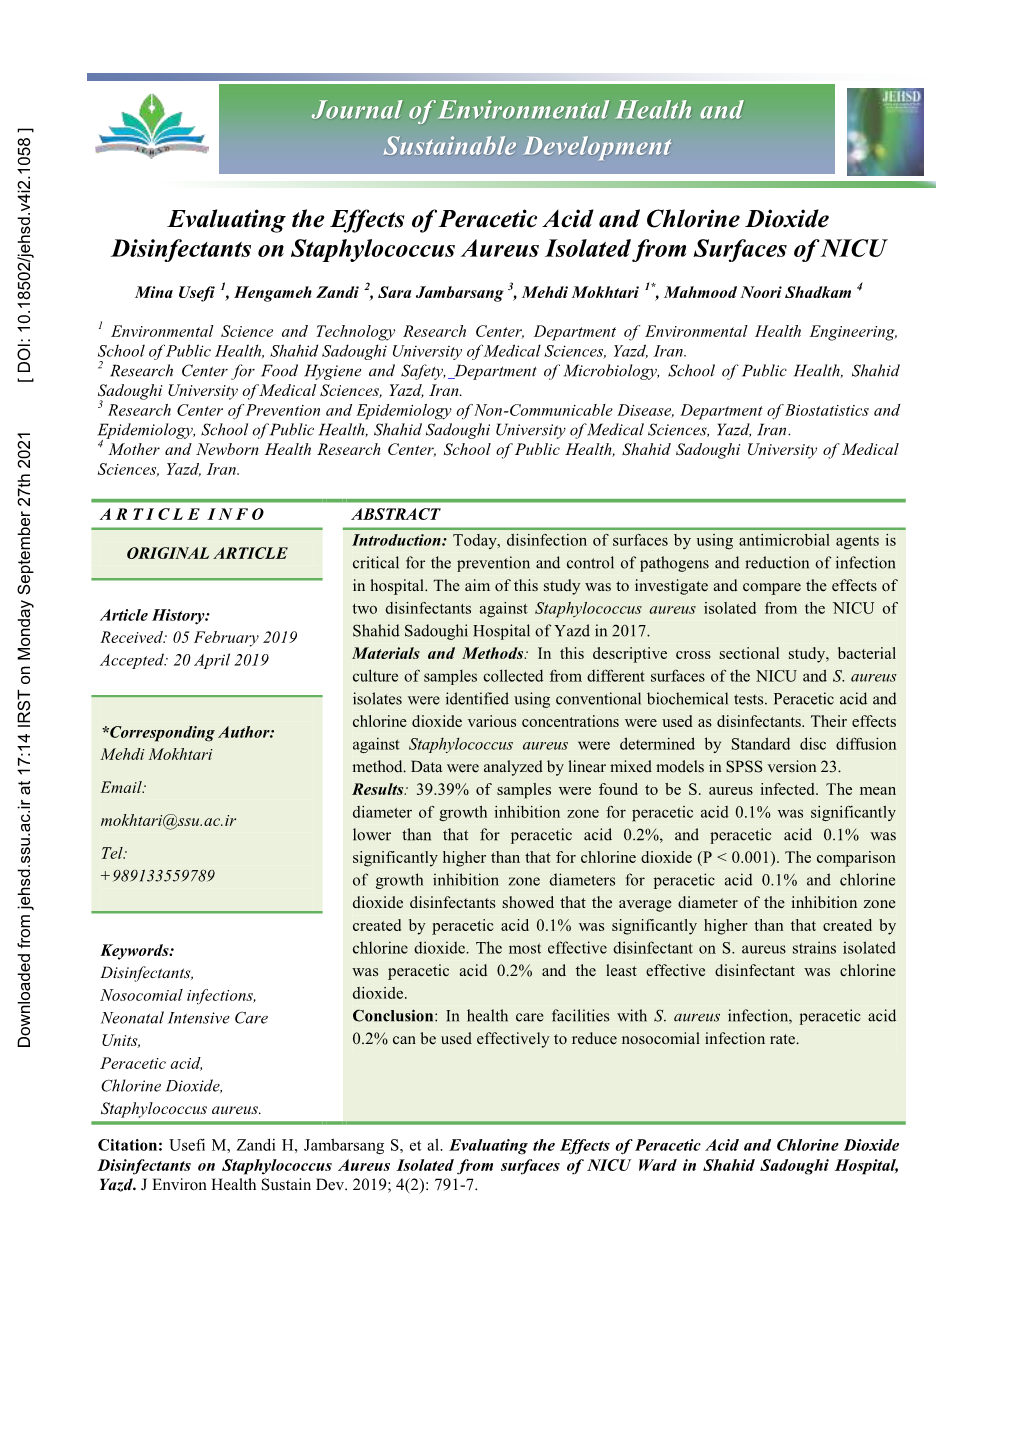 Evaluating the Effects of Peracetic Acid and Chlorine Dioxide Disinfectants on Staphylococcus Aureus Isolated from Surfaces of NICU